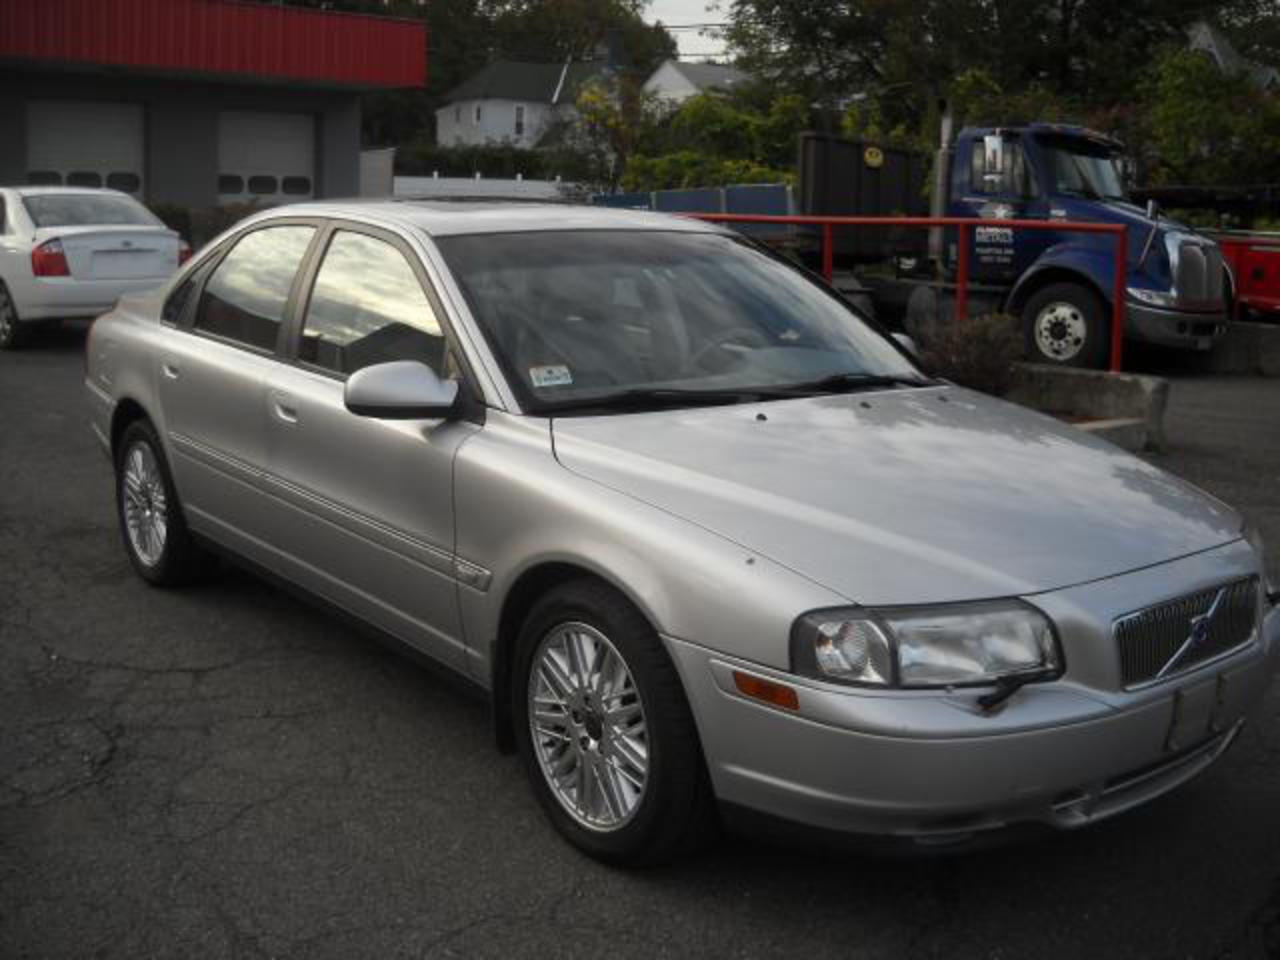 View Download Wallpaper. 640x480. Comments. Volvo S80 29